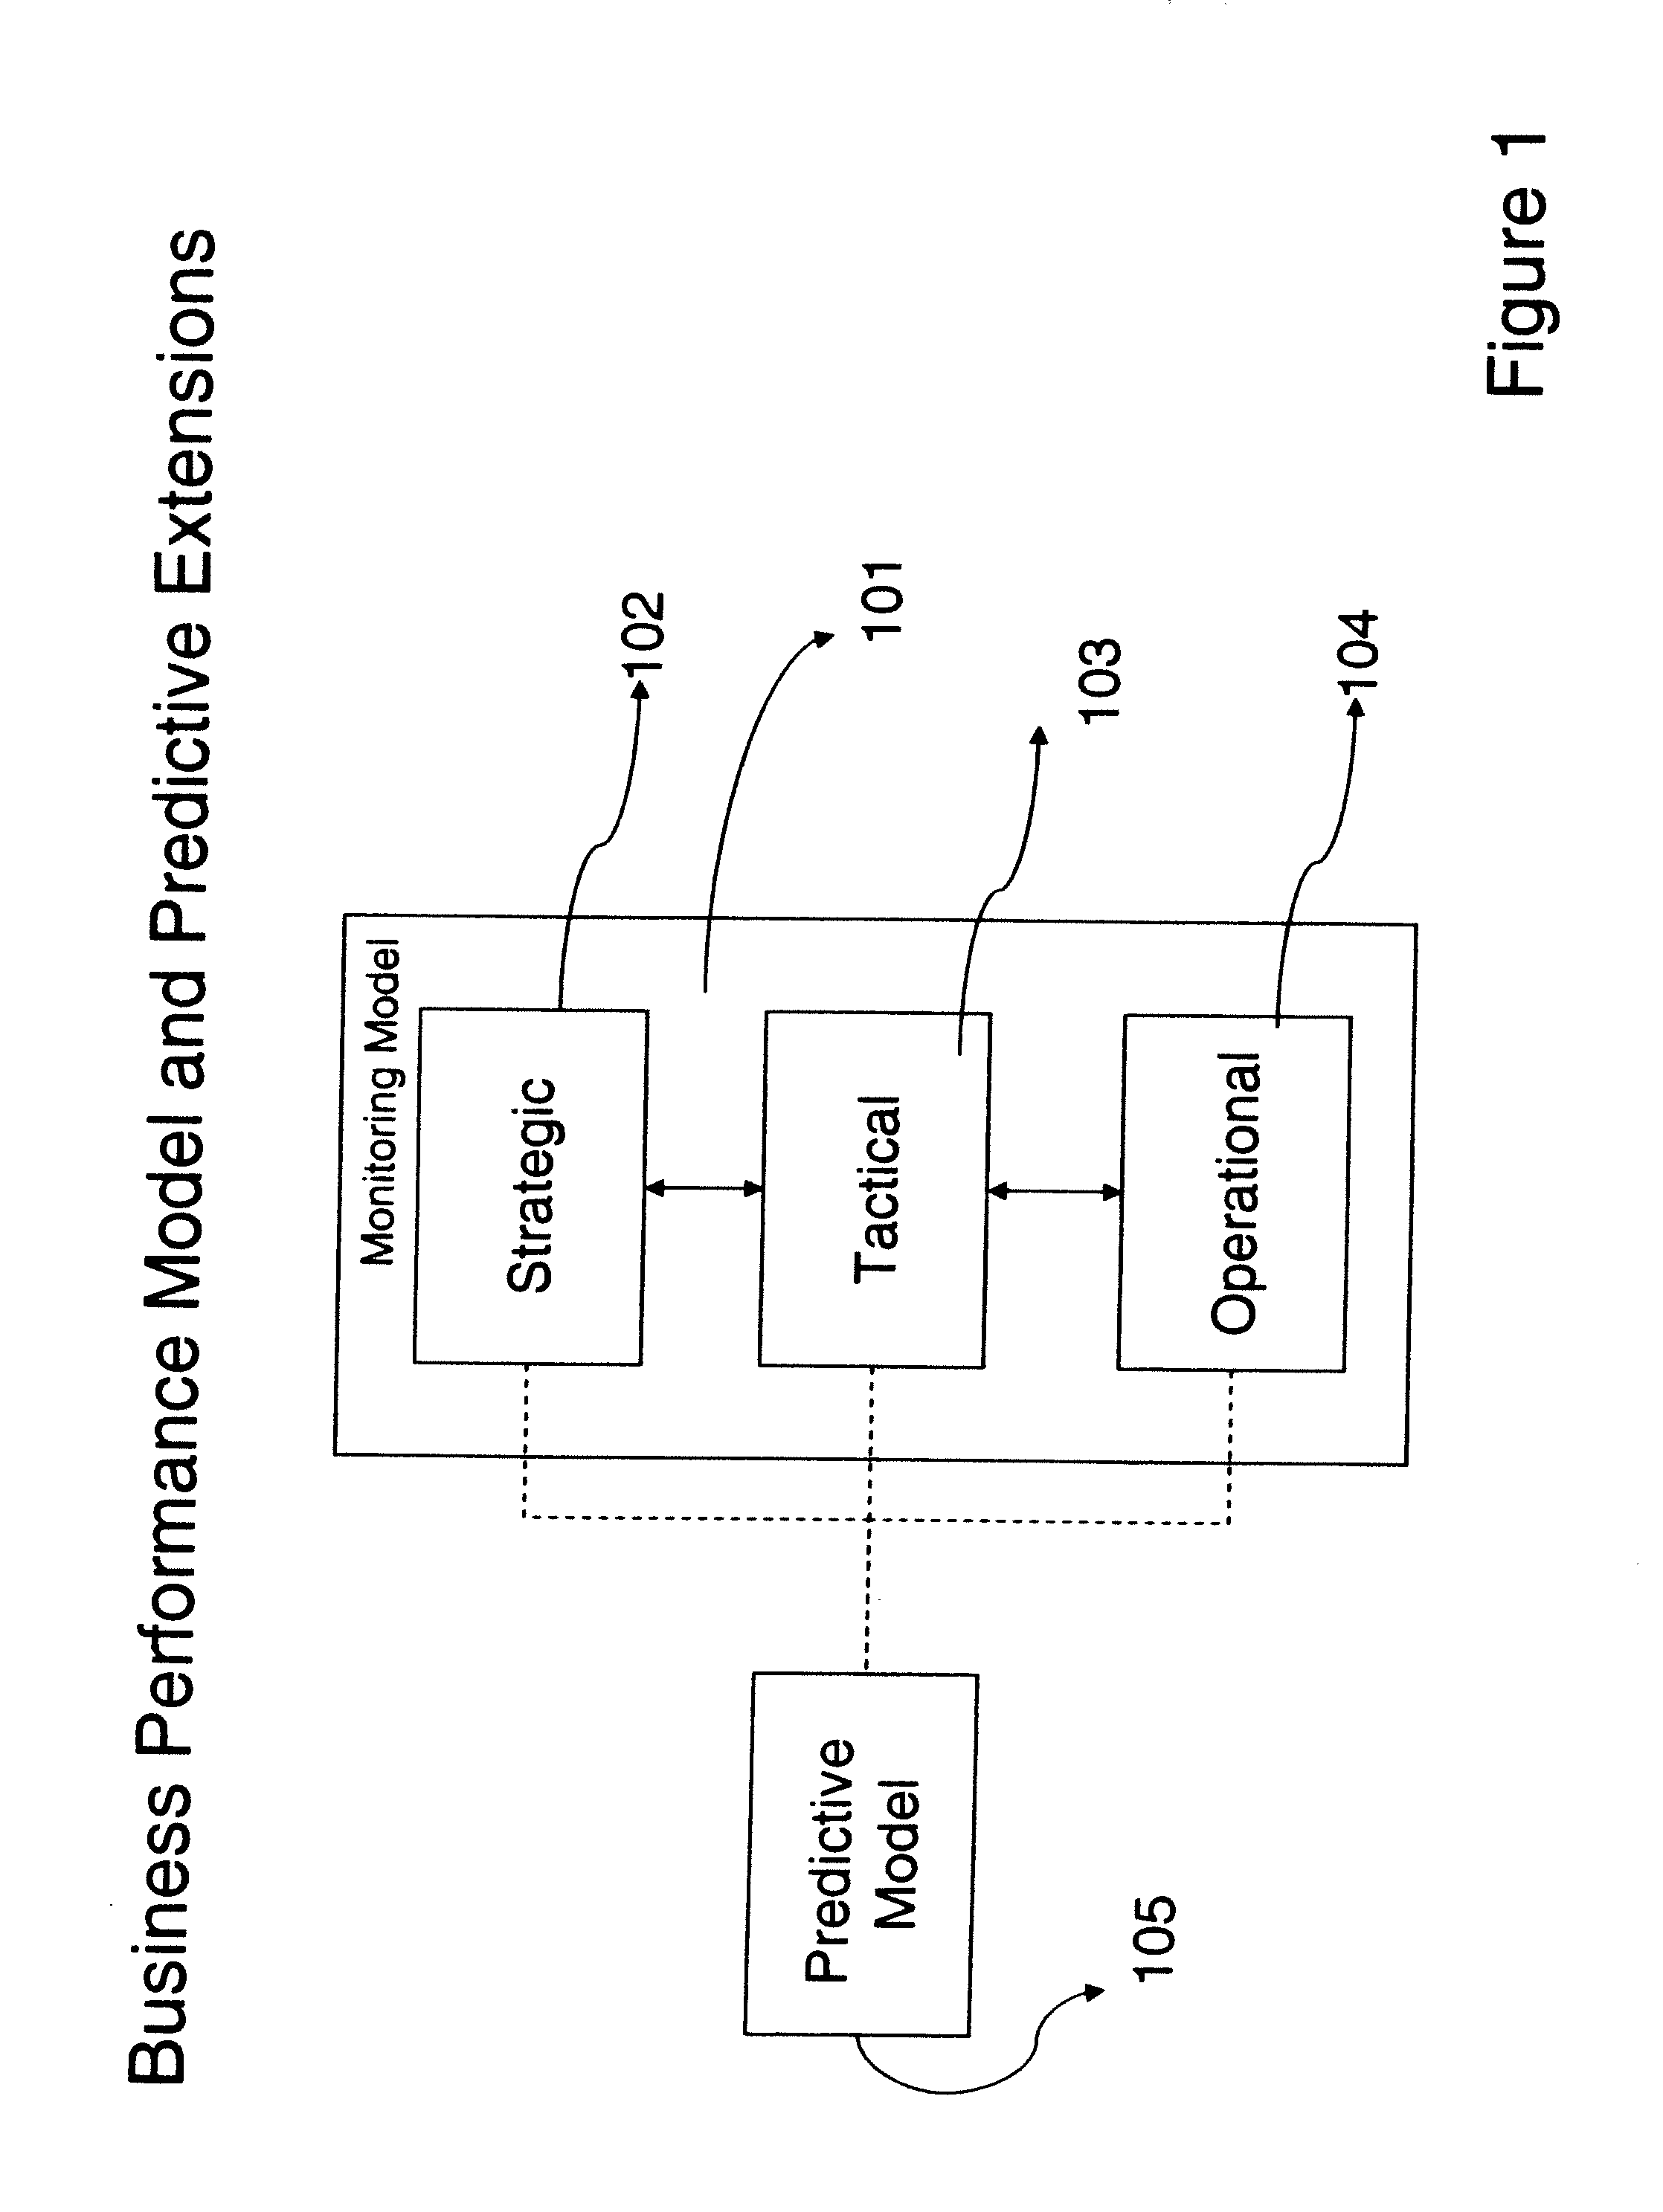 System and method for applying predictive metric analysis for a business monitoring subsystem